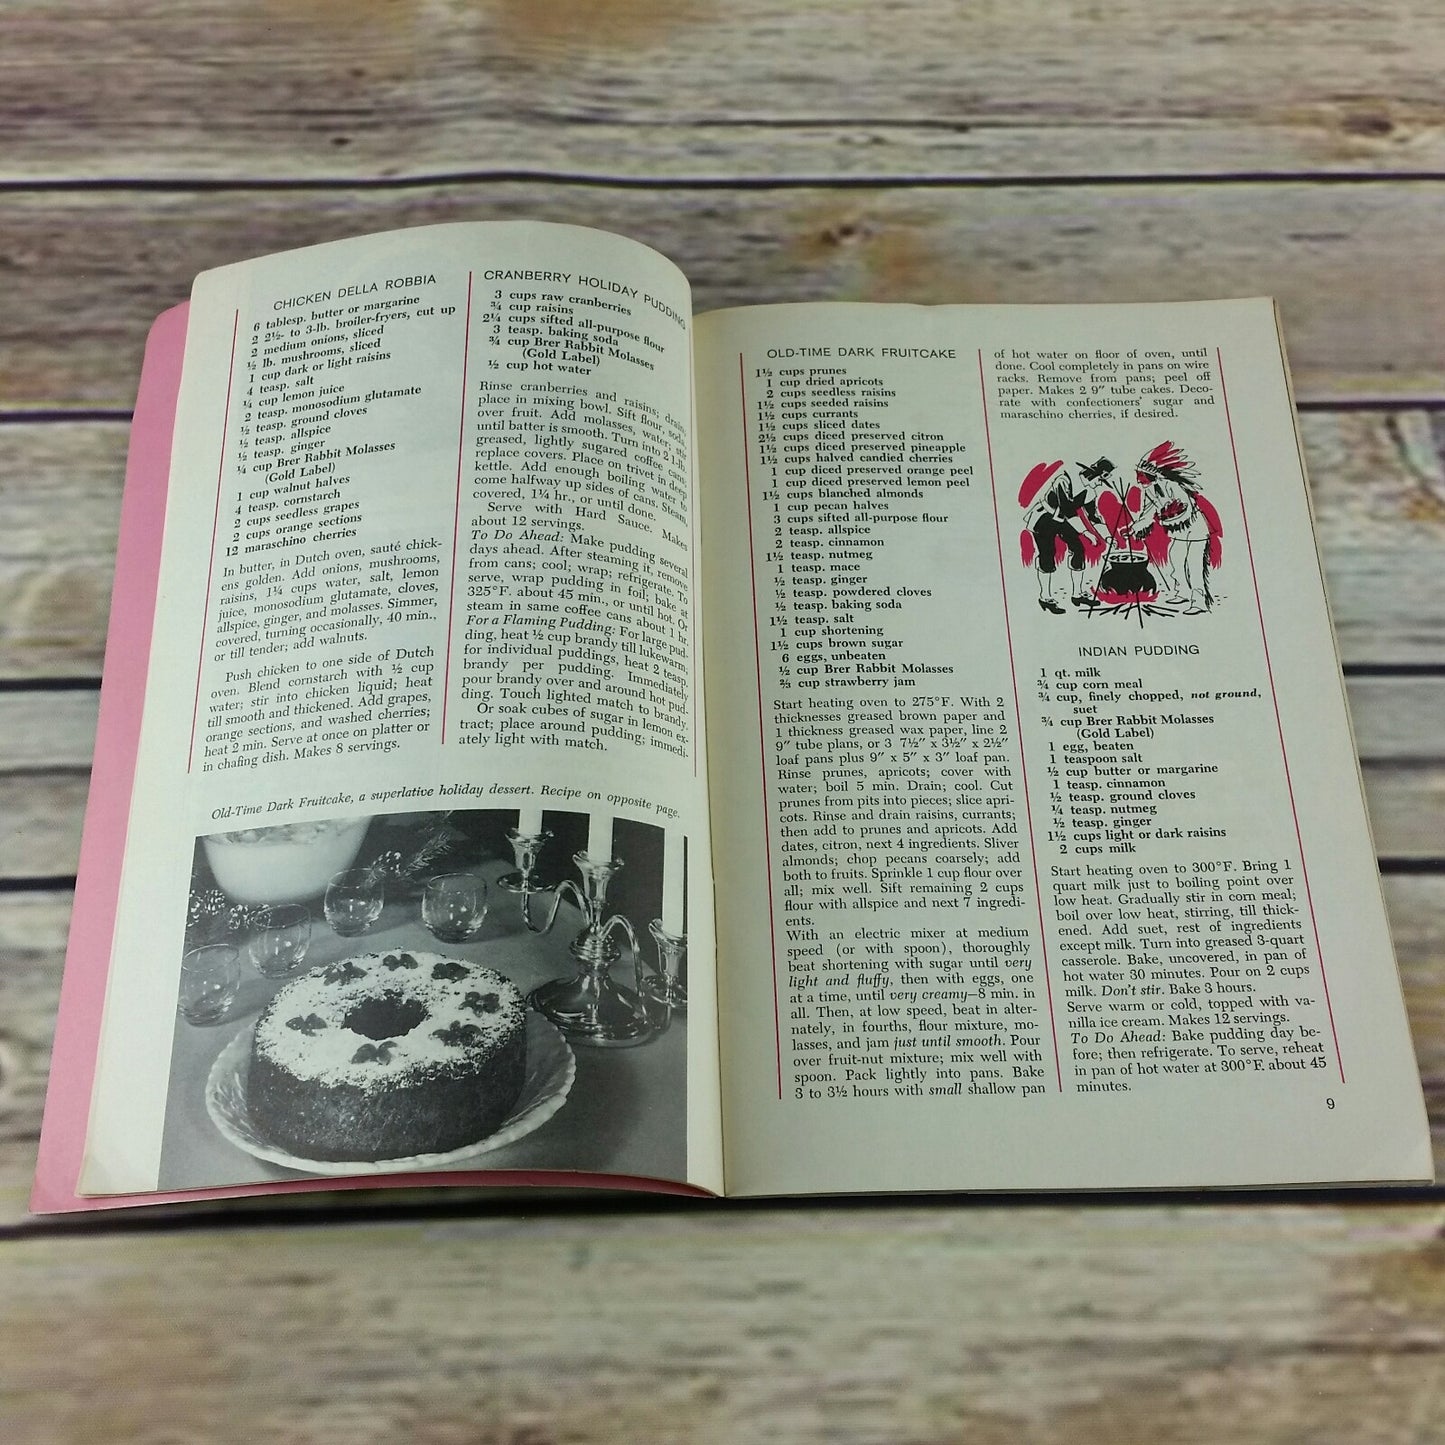 Vintage Party Cookbook Brer Rabbit Molasses Promo Recipes 1964 Ads Booklet Advertising - At Grandma's Table